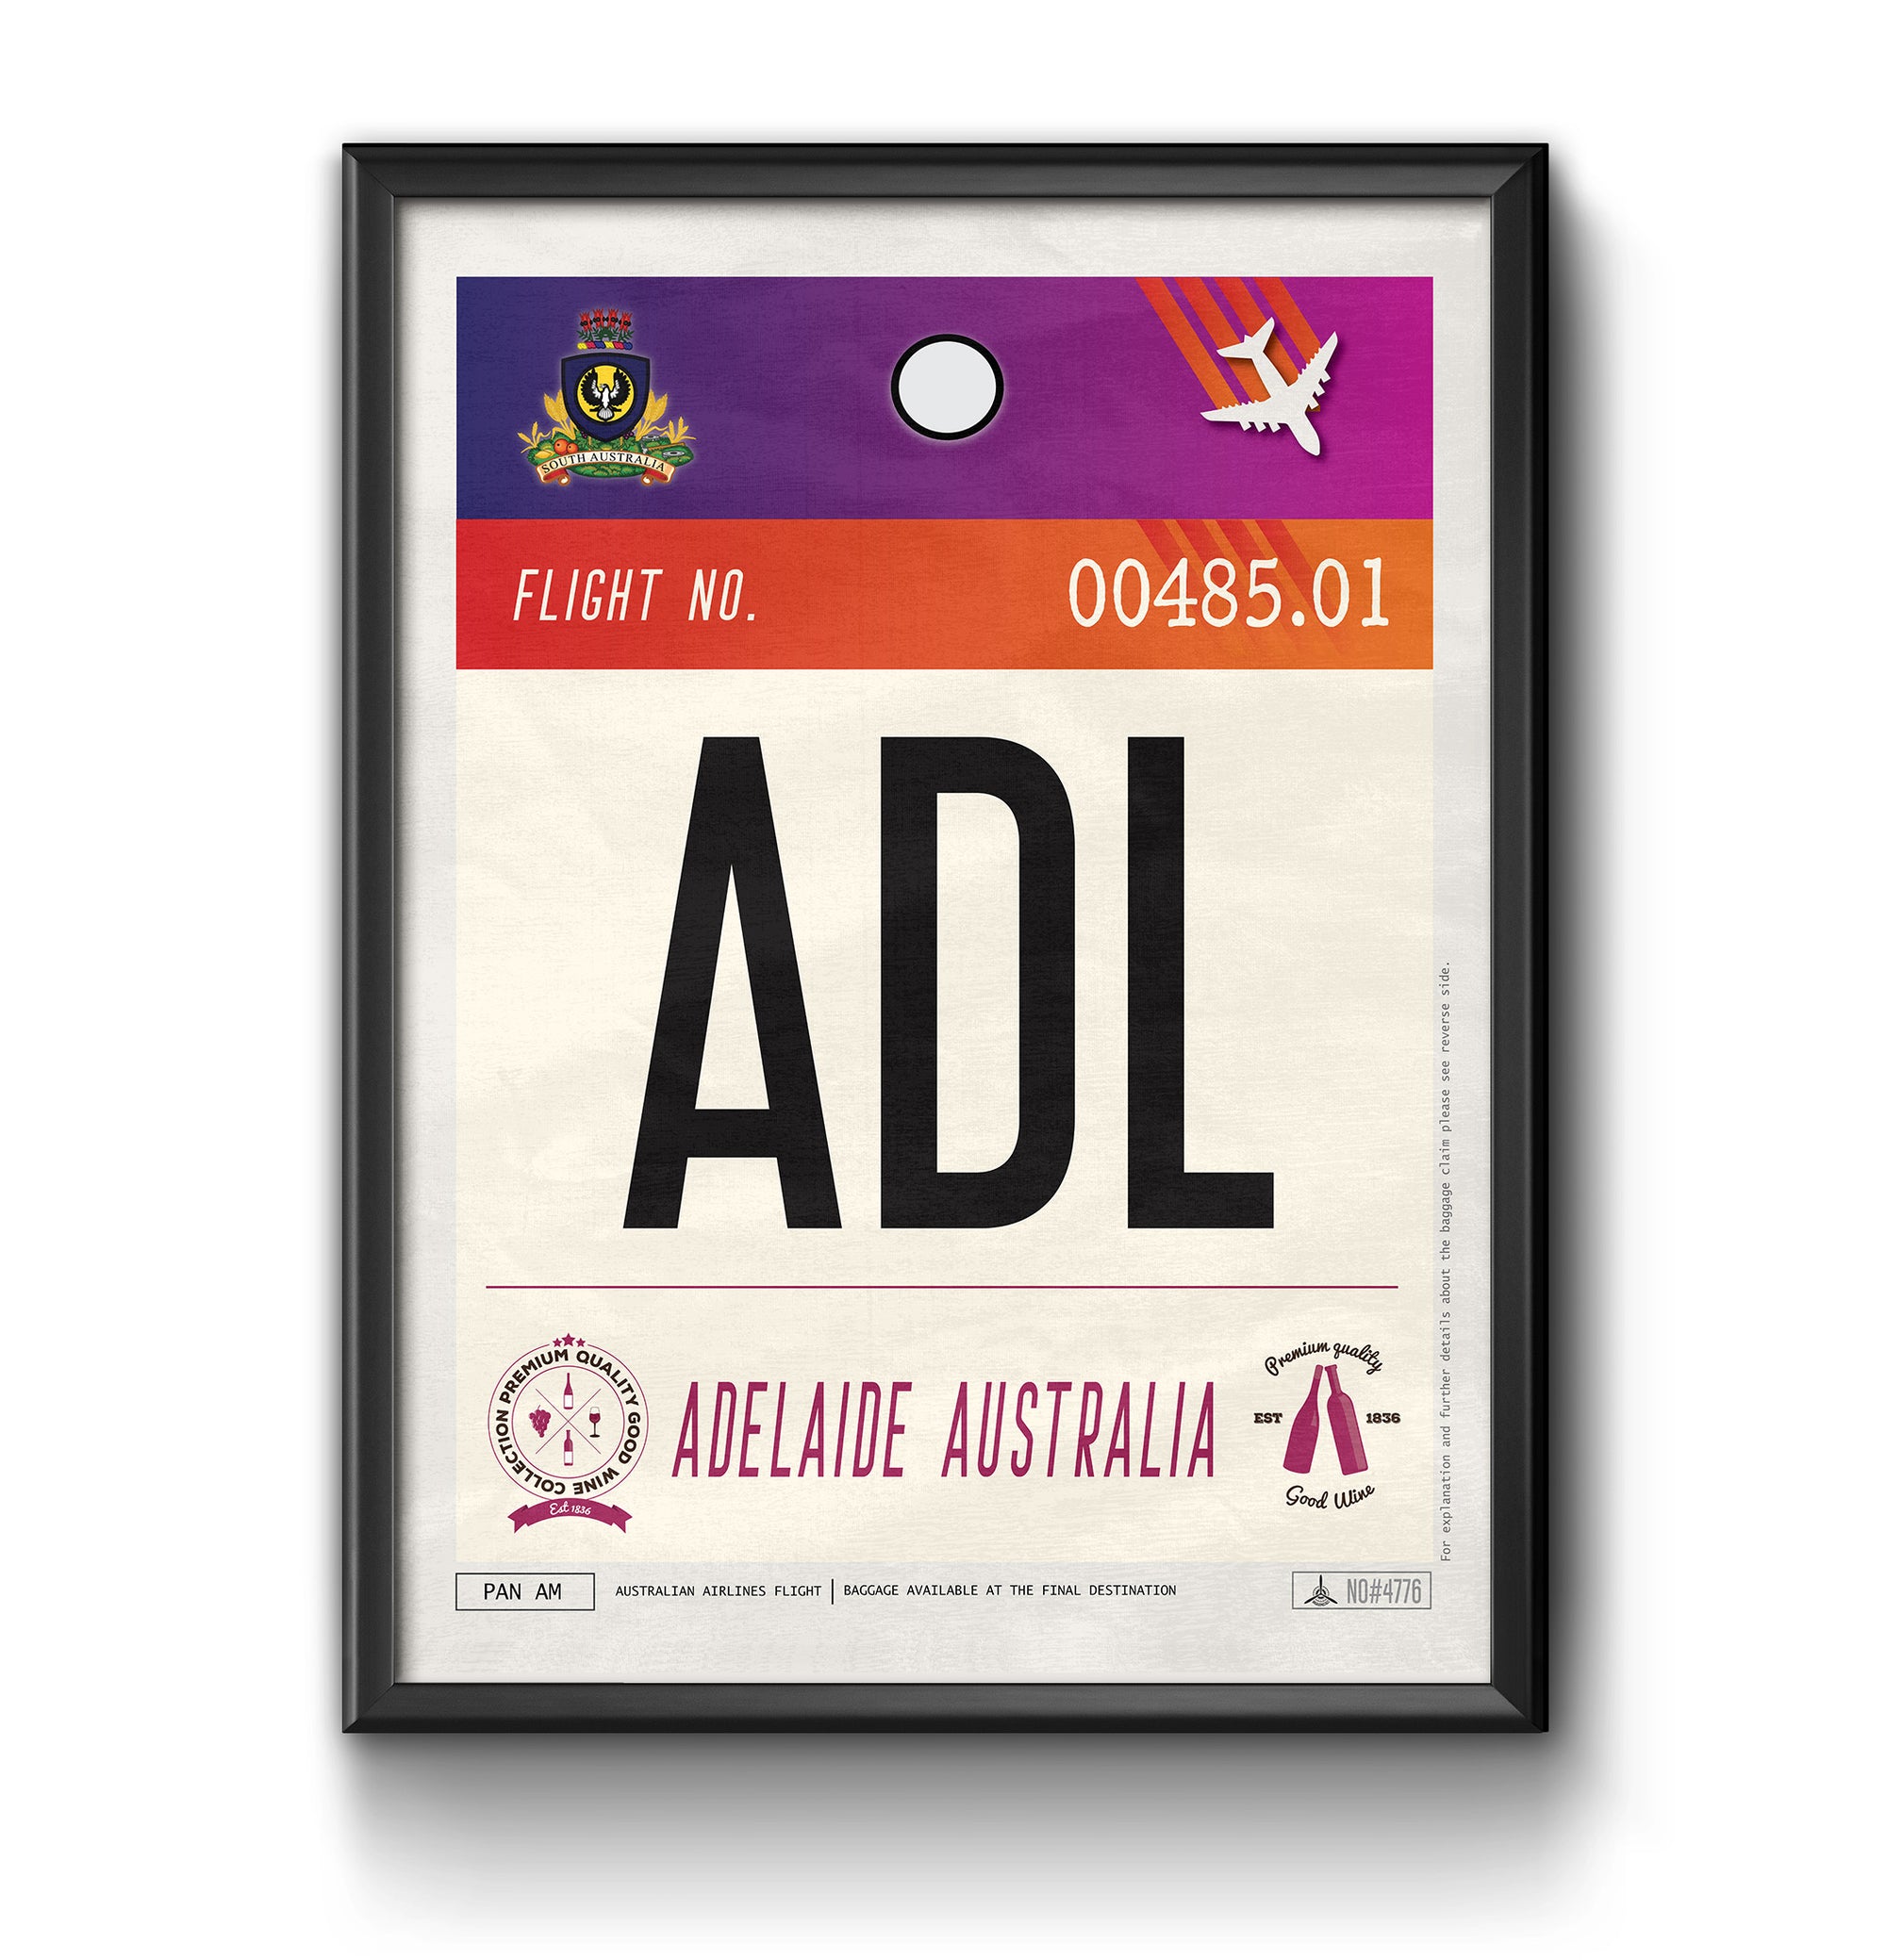 Adelaide australia ADL airport tag poster luggage tag 